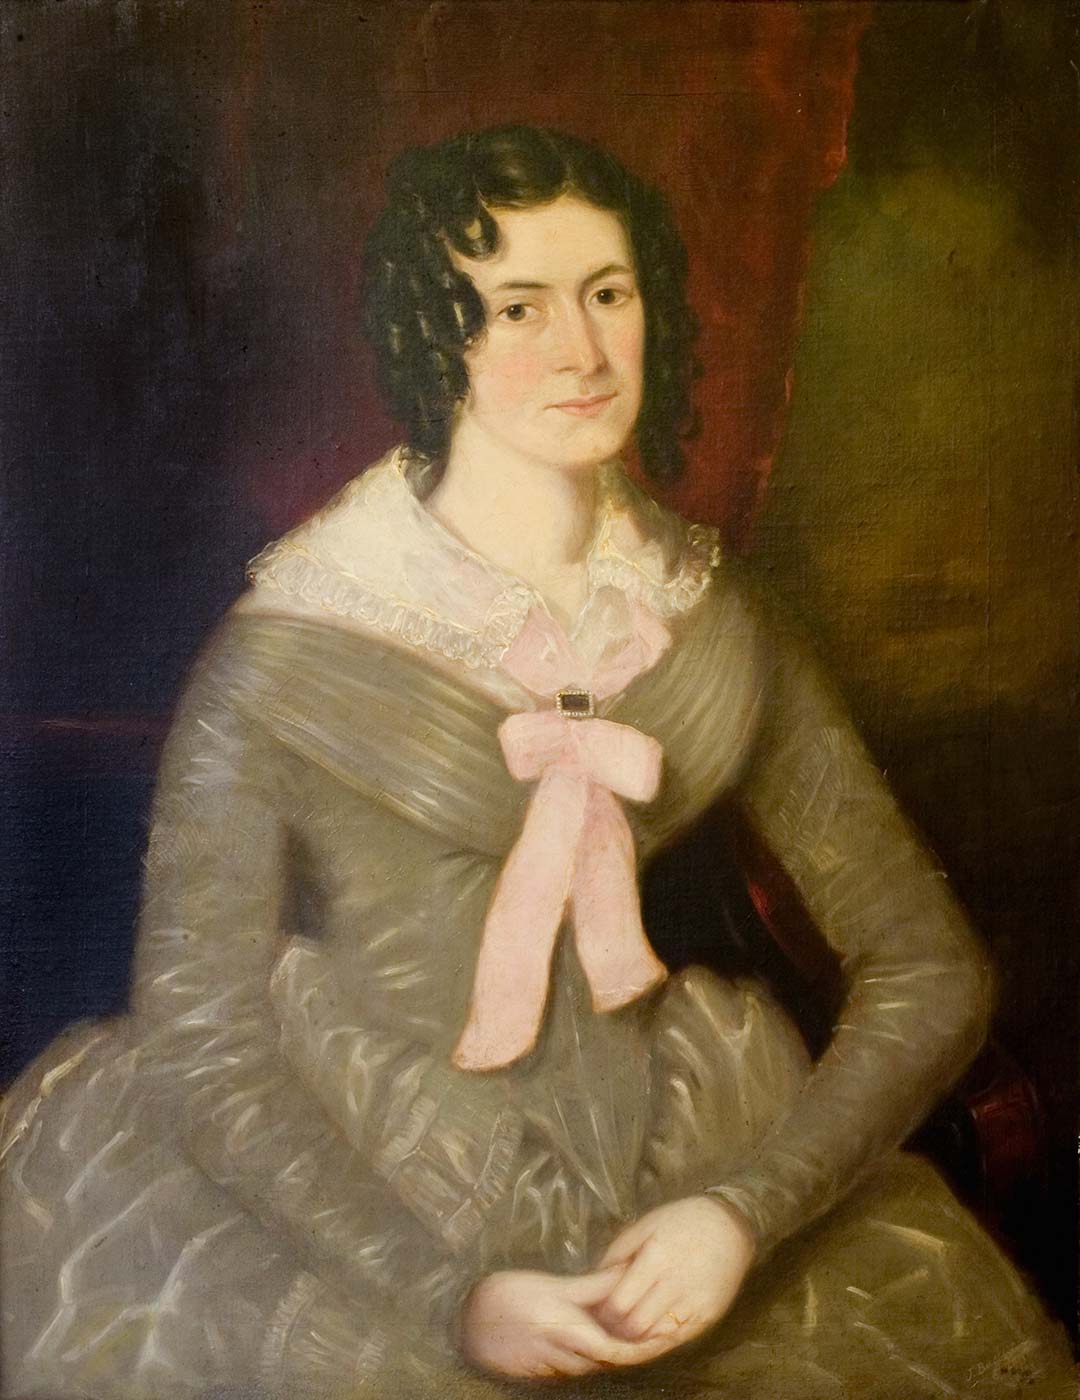 Portrait of a lady in 1845 seated with her hands folded together in her lap, with ringlets around her face wearing an olive-coloured dress with full skirt, tight waist and lace collar tied with pink bow and clasp at the front. - click to view larger image